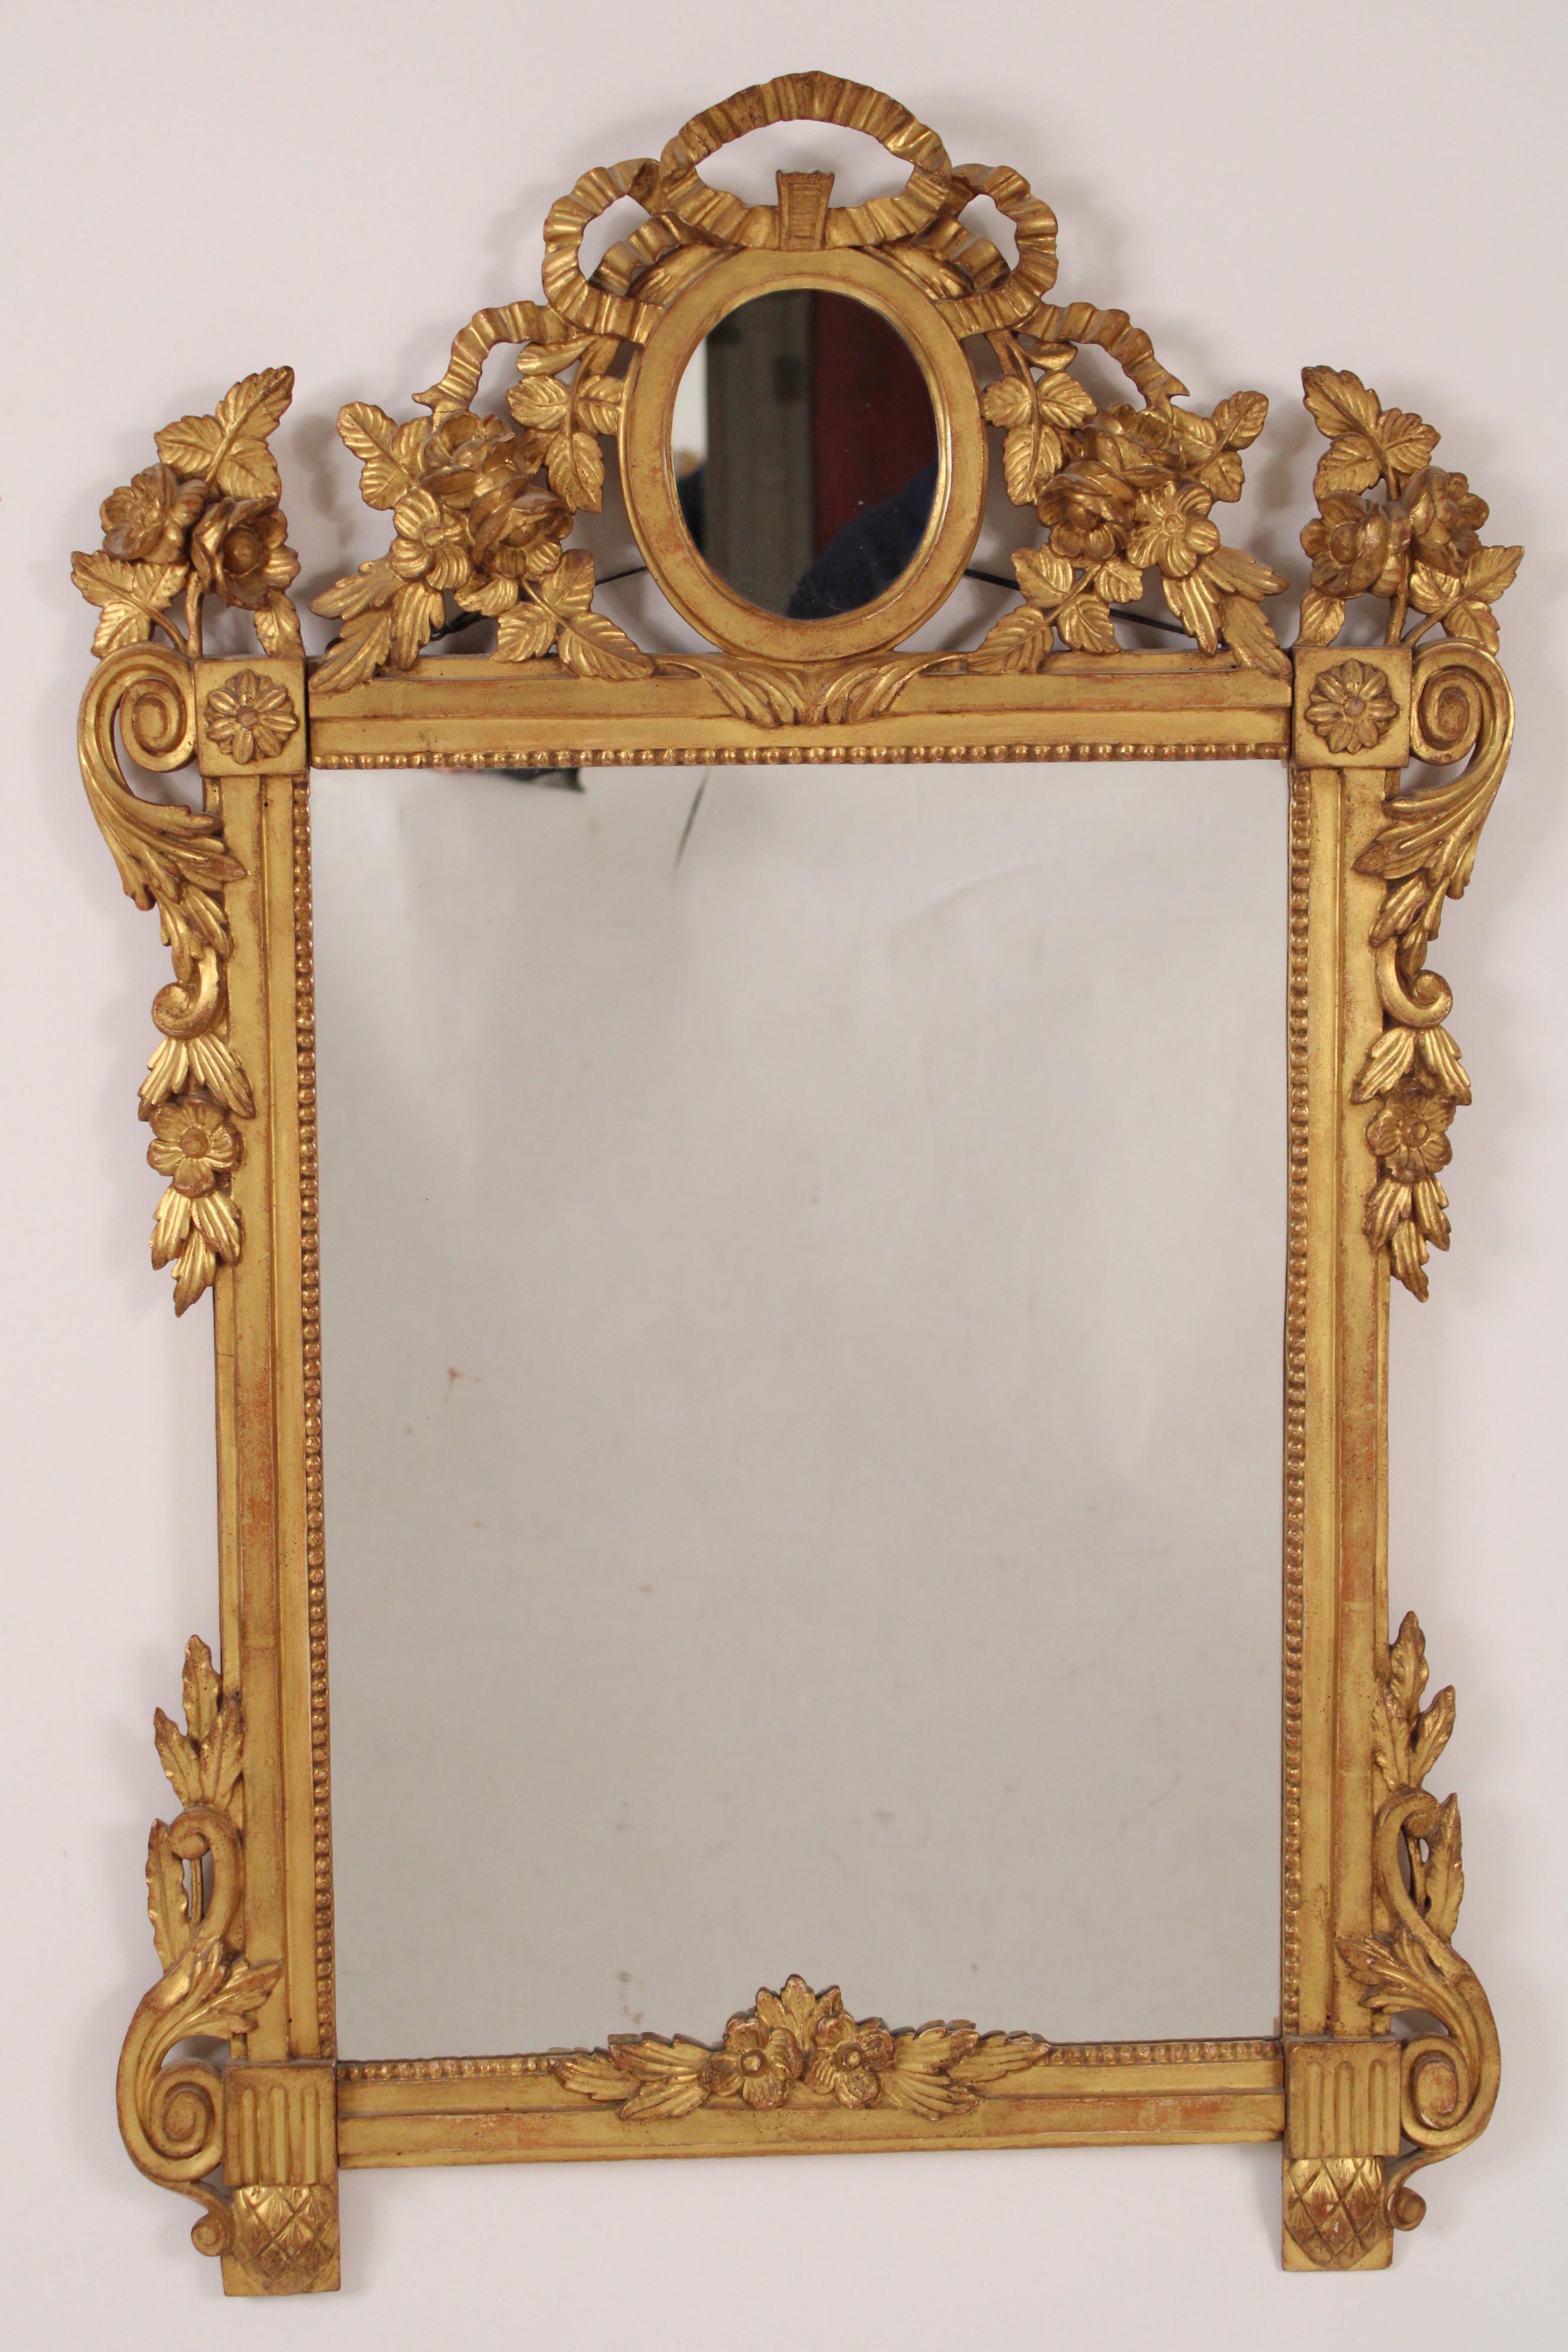 Antique Louis XVI style gilt wood (gold leaf) mirror, circa 1900. The mirror's pediment with ribbon, leaf and foliate wood carvings surrounding an oval mirror. The mirror's stiles with leaf and foliate gilt wood carvings.